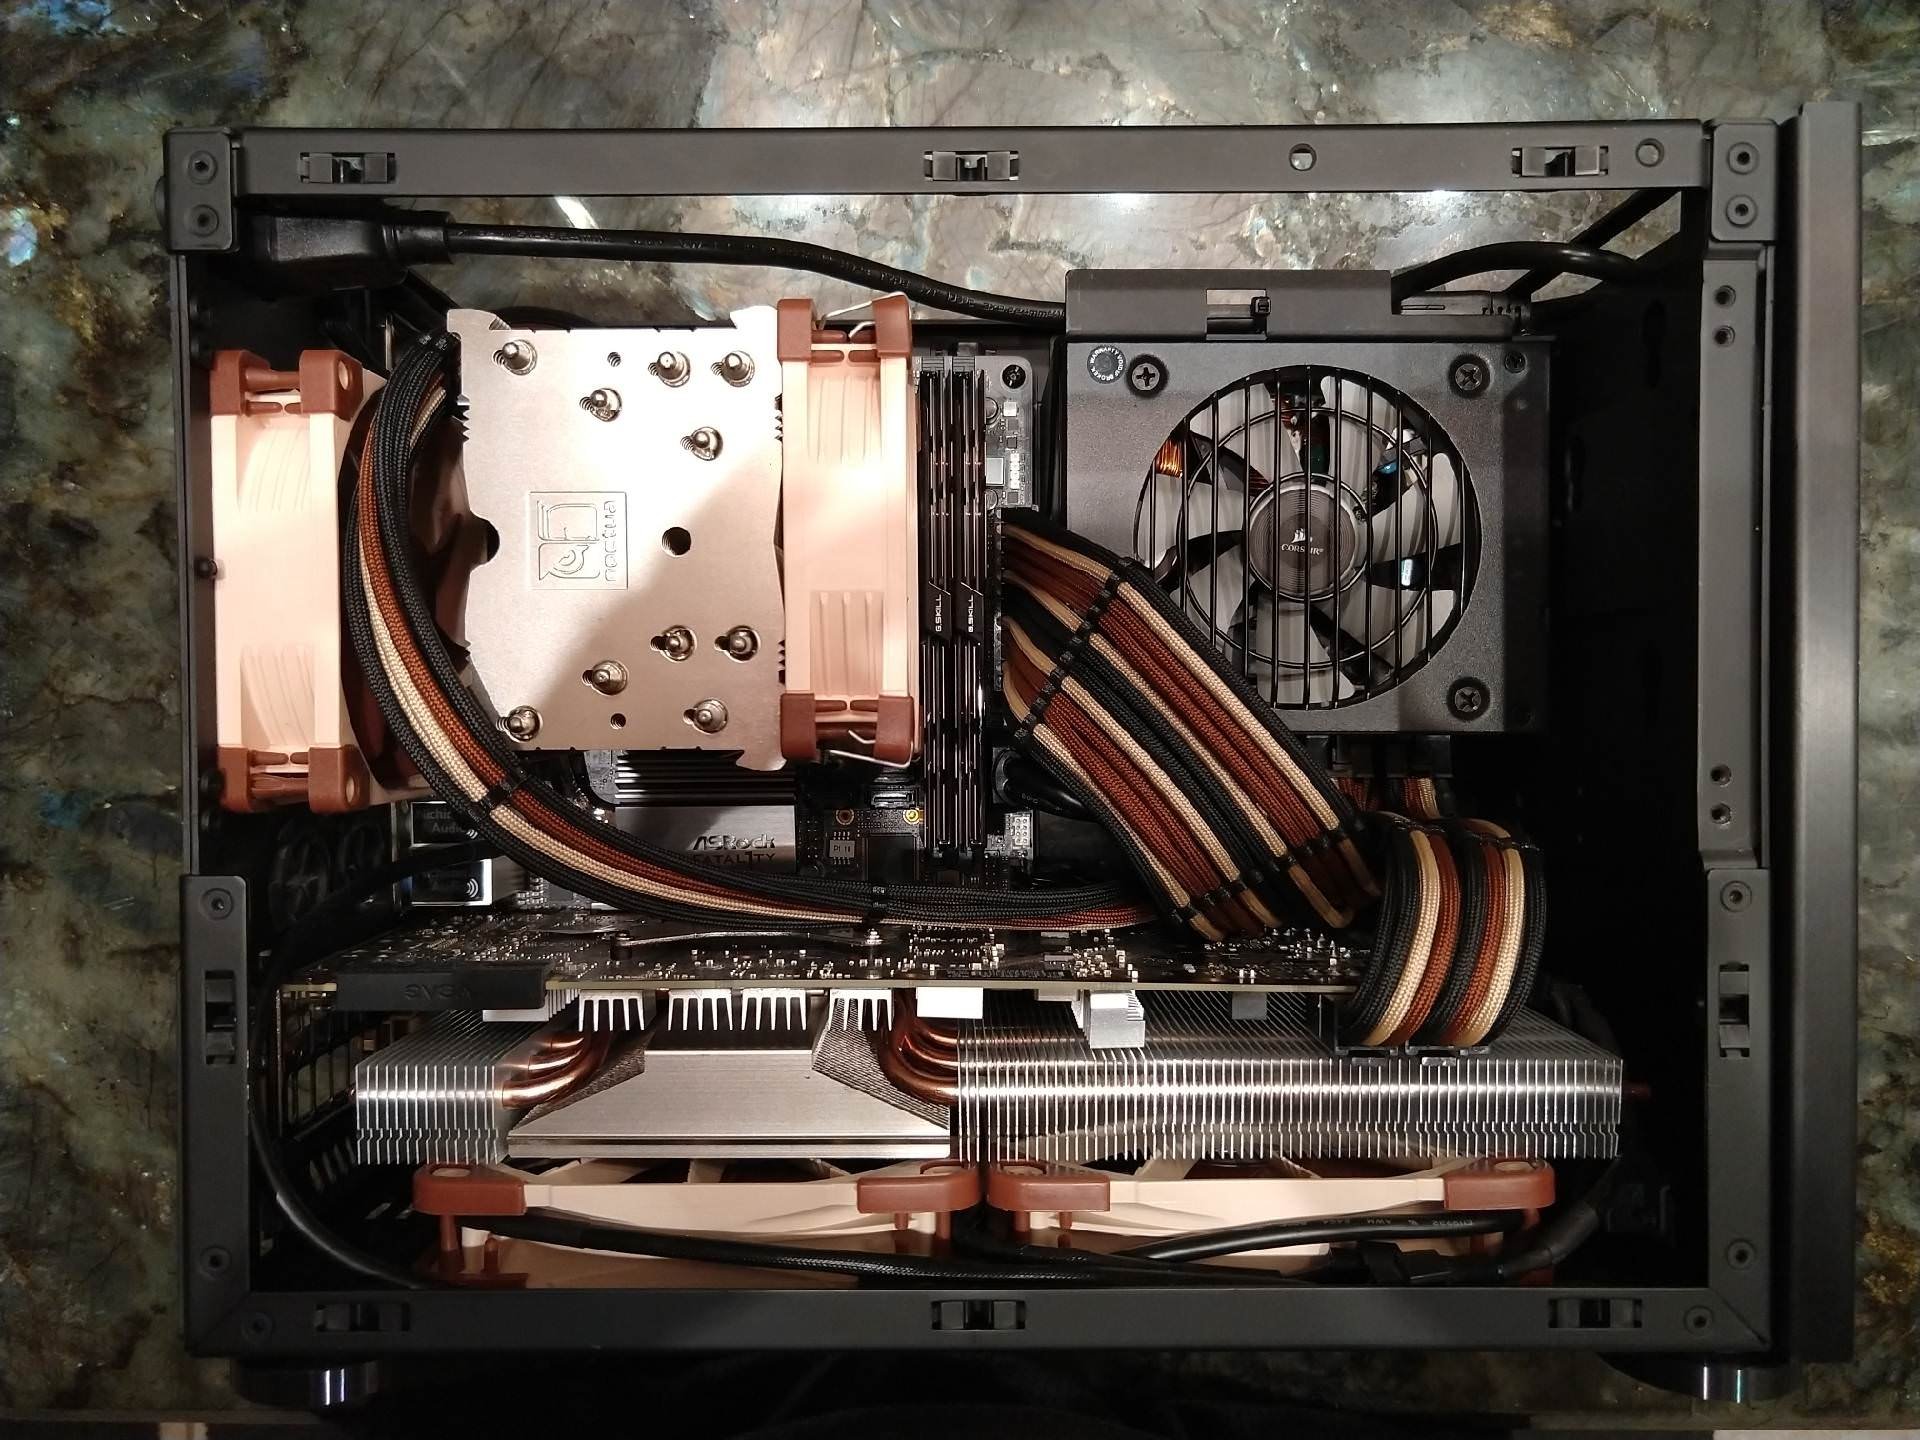 Custom Noctua Themed Cables In My Ncase M1 Sffpc